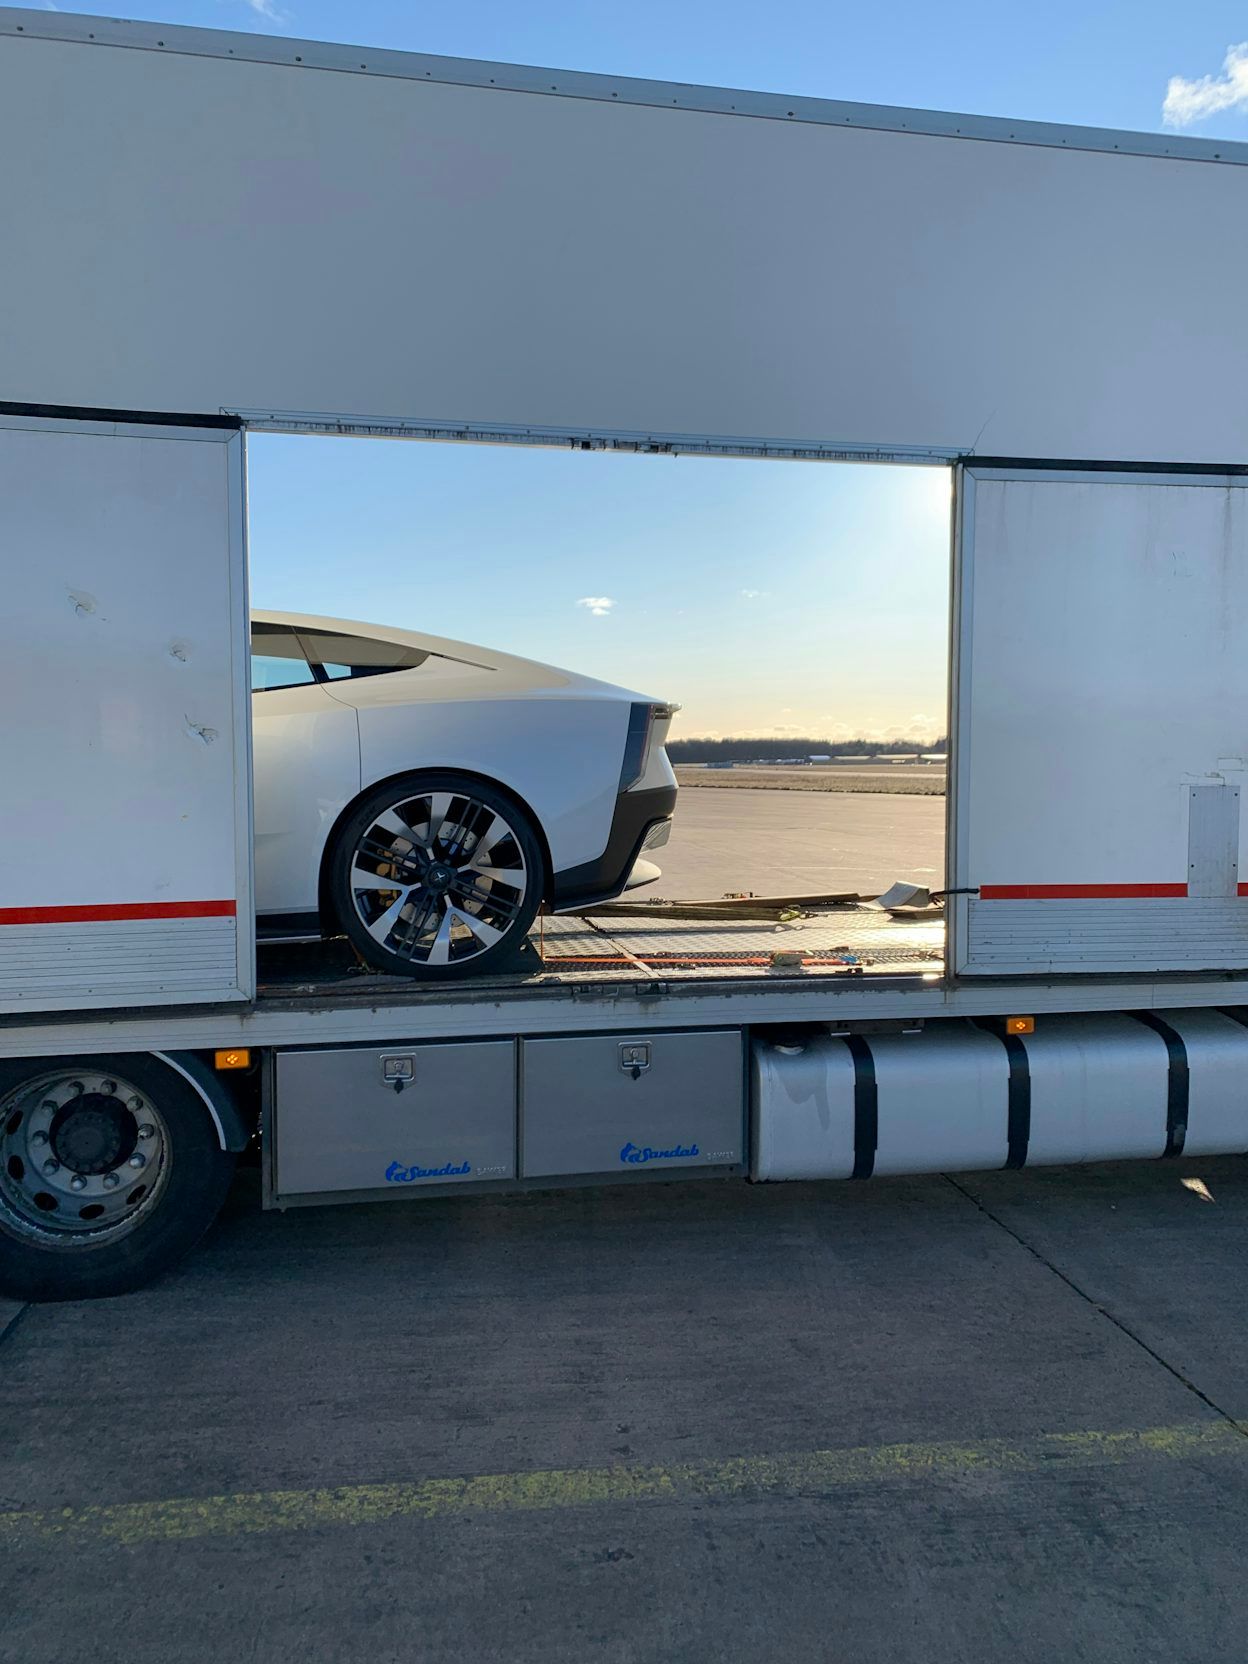 The rear of a Polestar visible on a truck